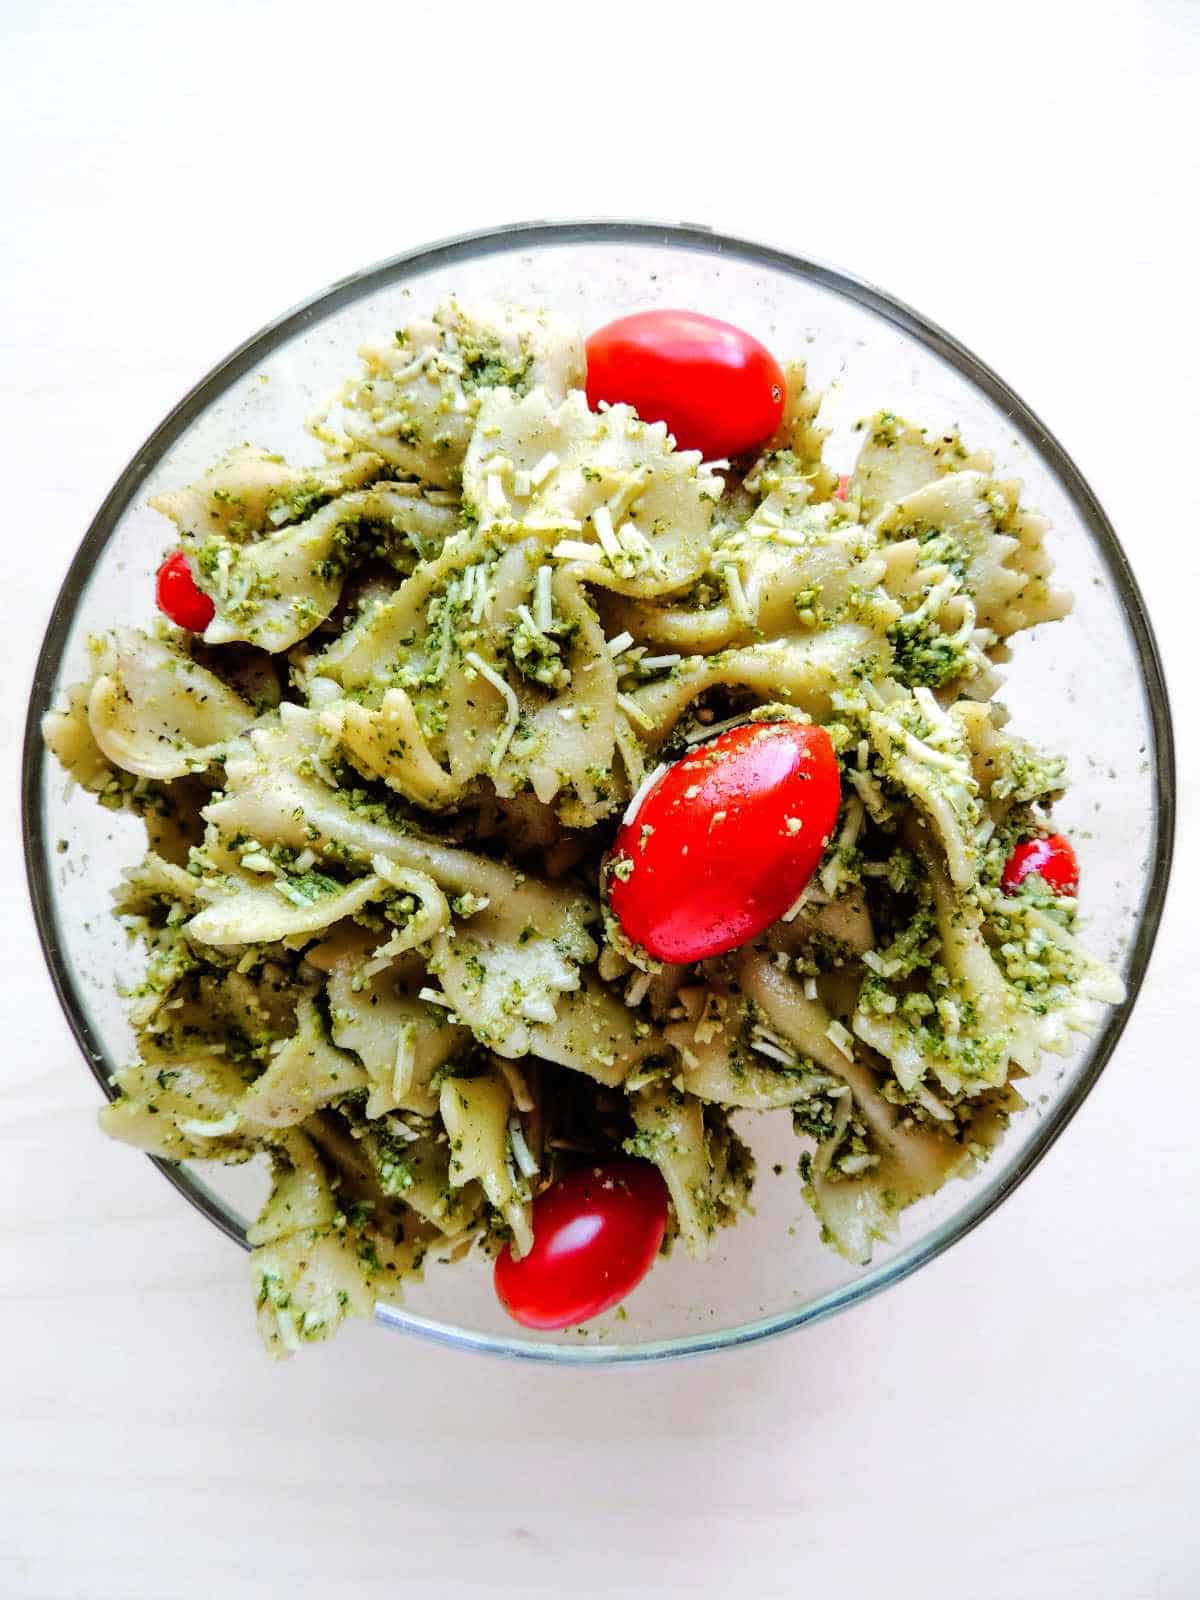 tossed pasta, tomatoes, and pesto in a bowl.